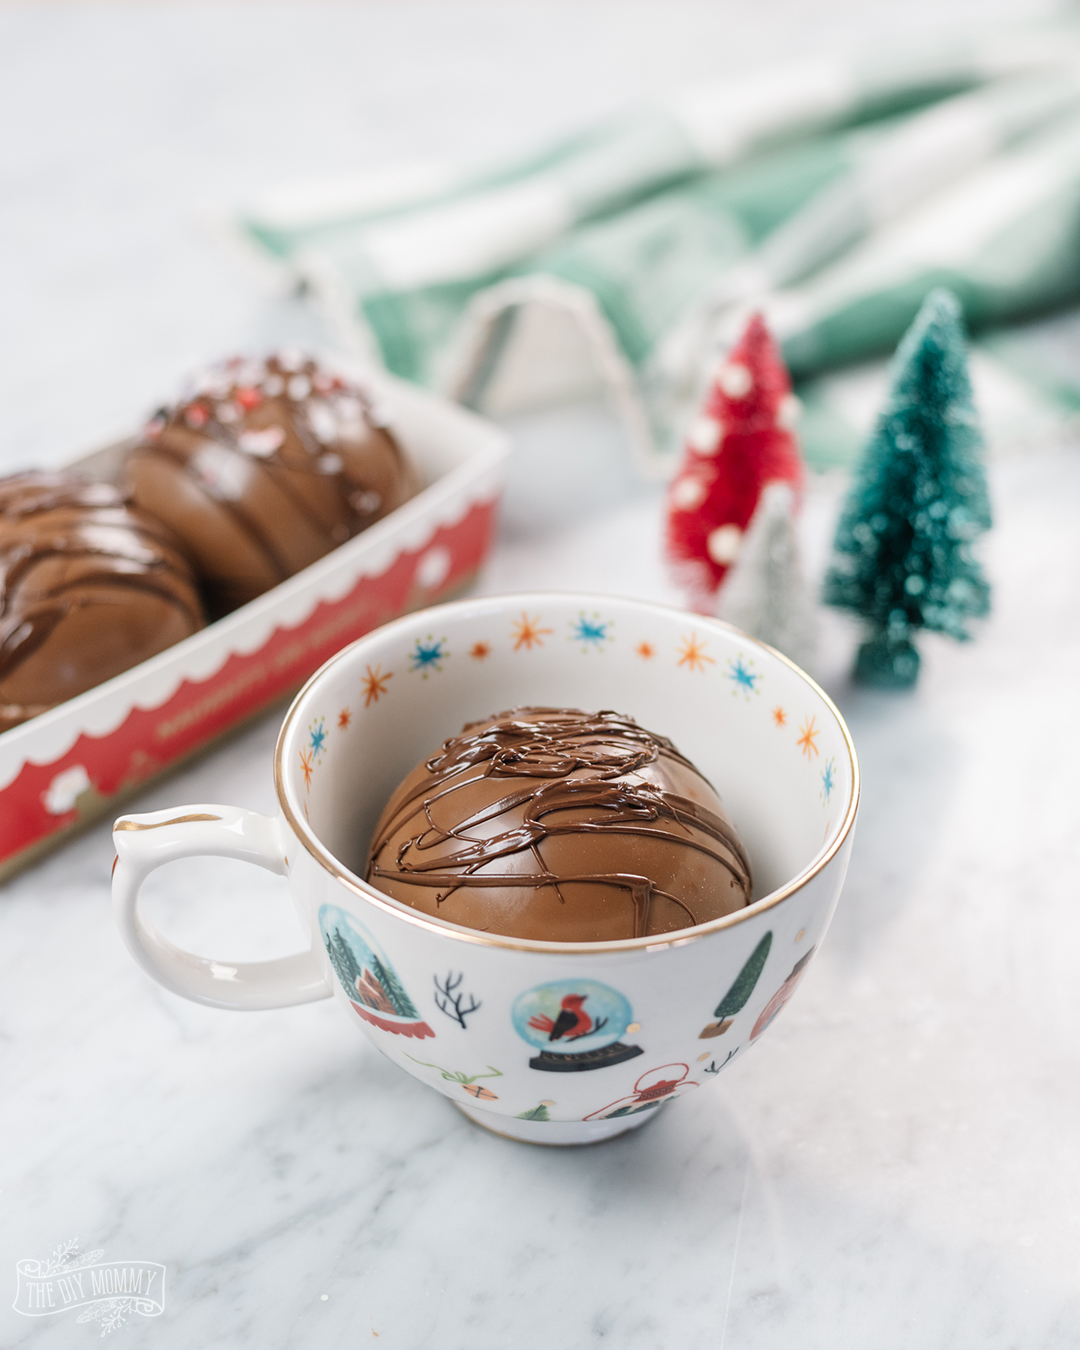 How to make DIY Cocoa Balls for Hot Chocolate